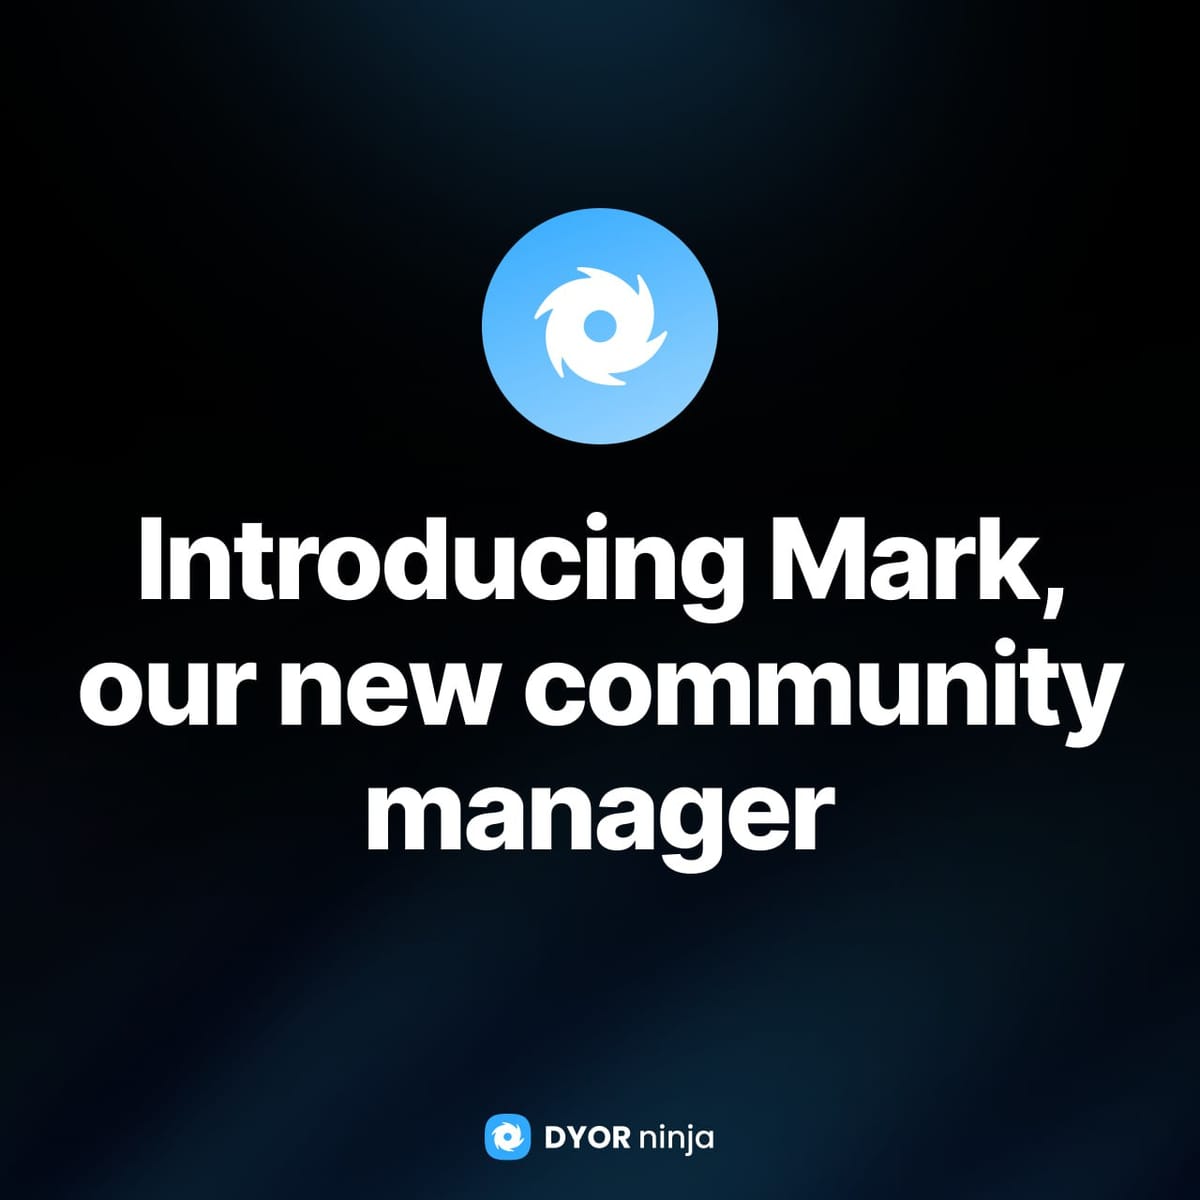 Introducing Mark, our new community manager